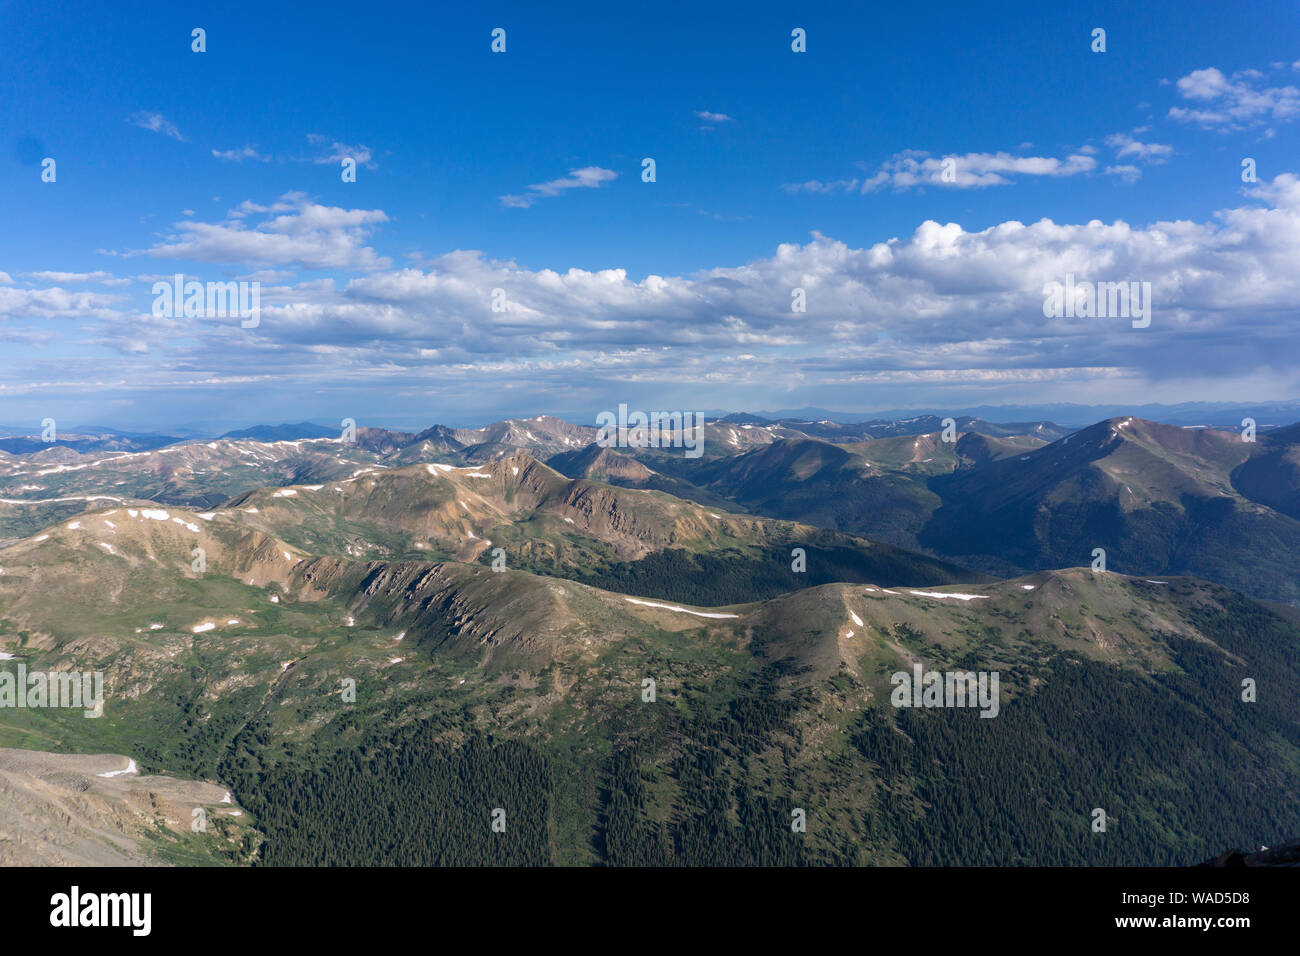 View from the top of Torreys peak, Colorado Rocky mountains Stock Photo